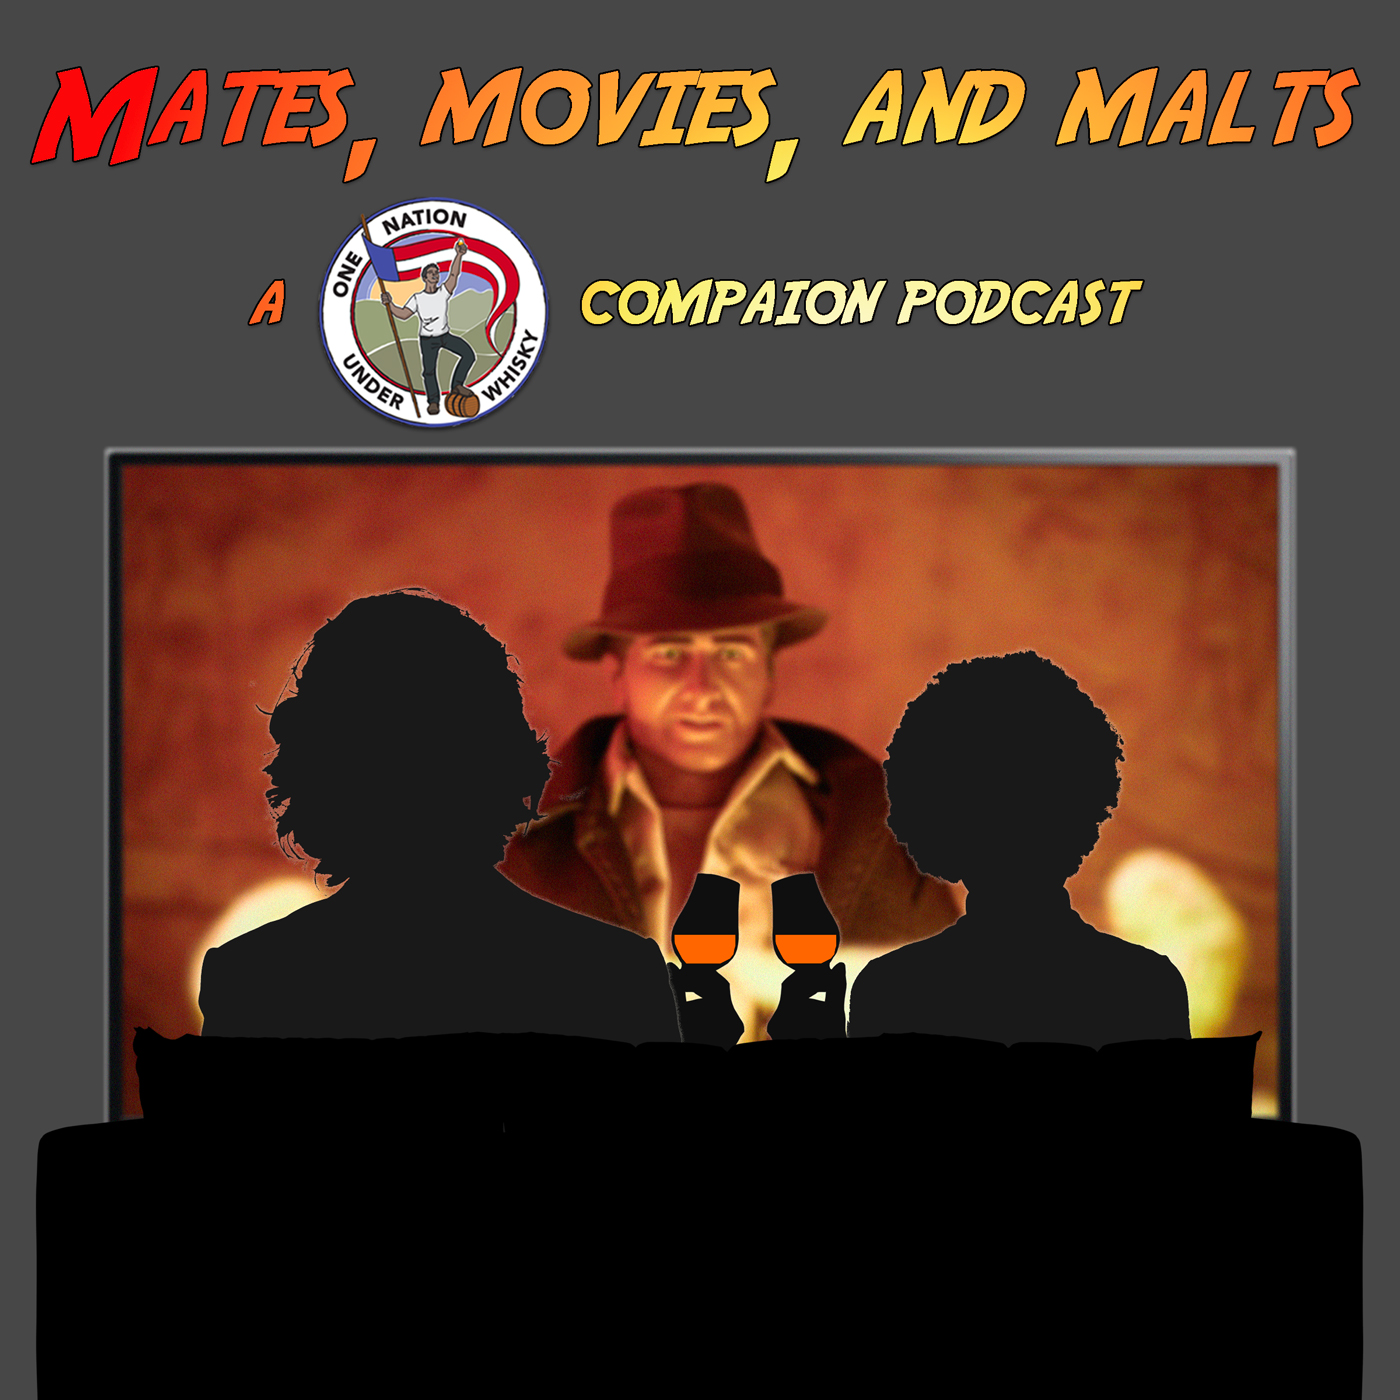 The Mates, Movies, and Malts's Podcast